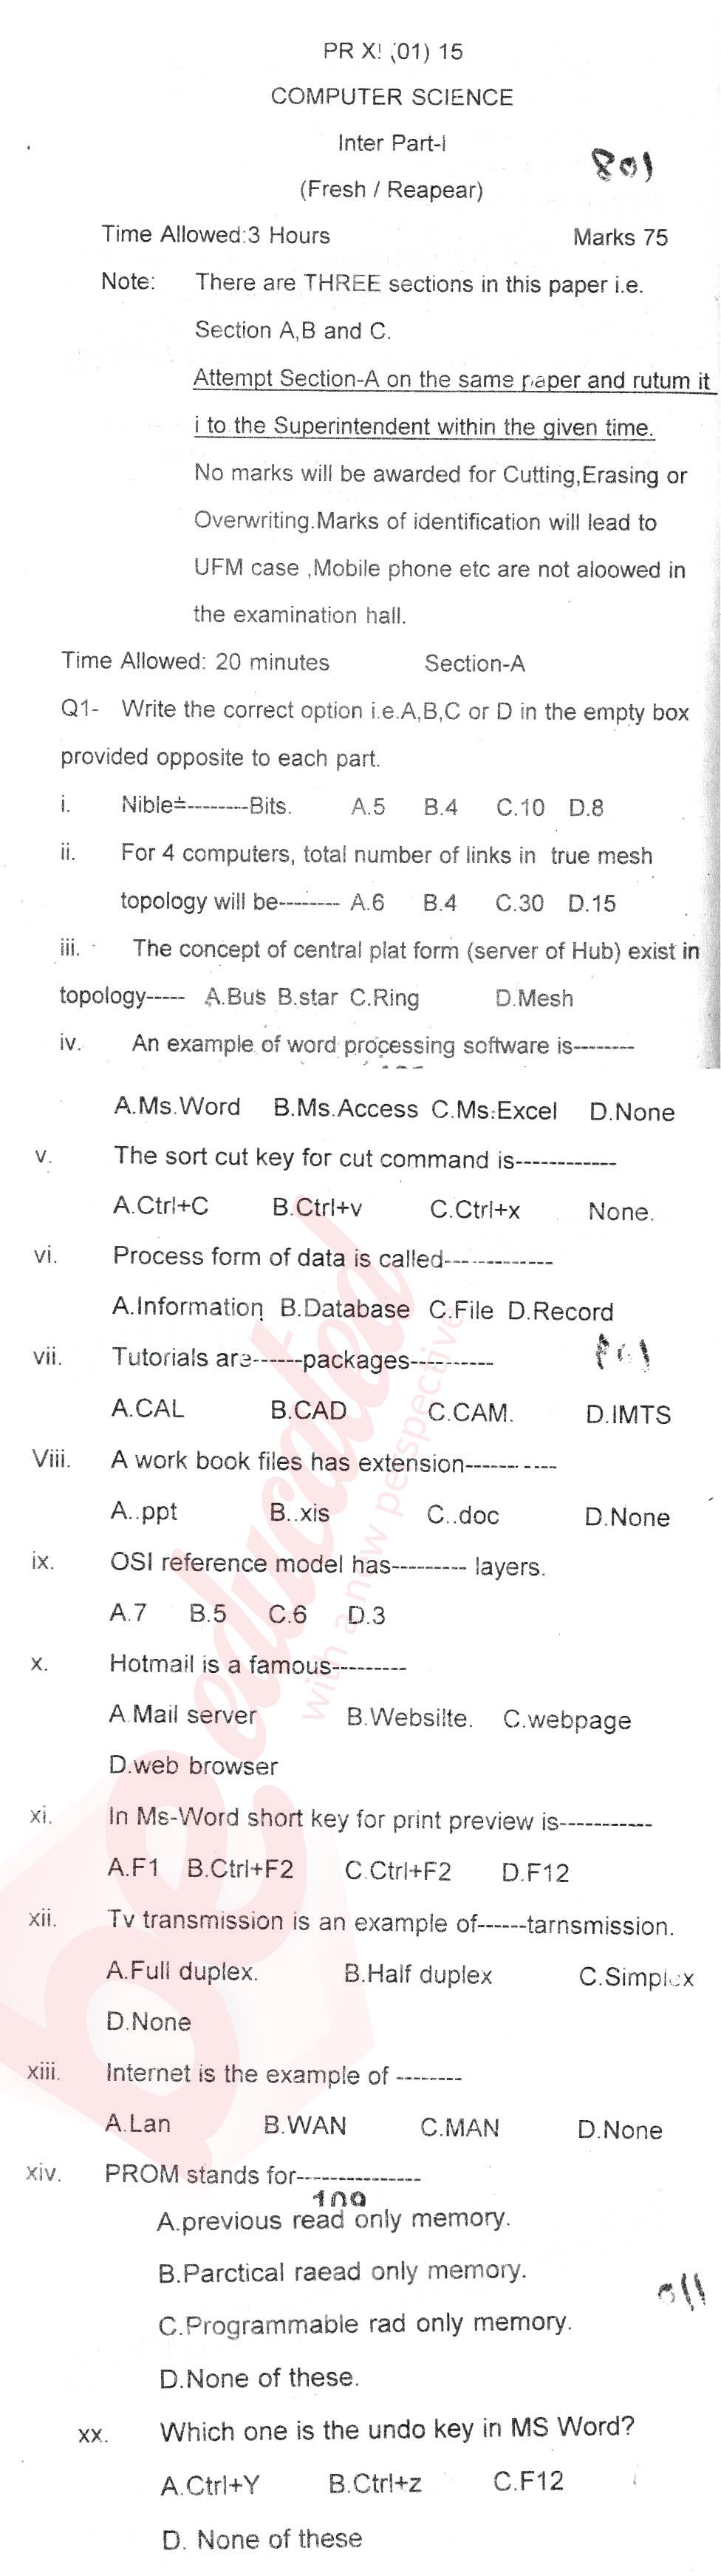 Computer Science ICS Part 1 Past Paper Group 1 BISE Abbottabad 2015